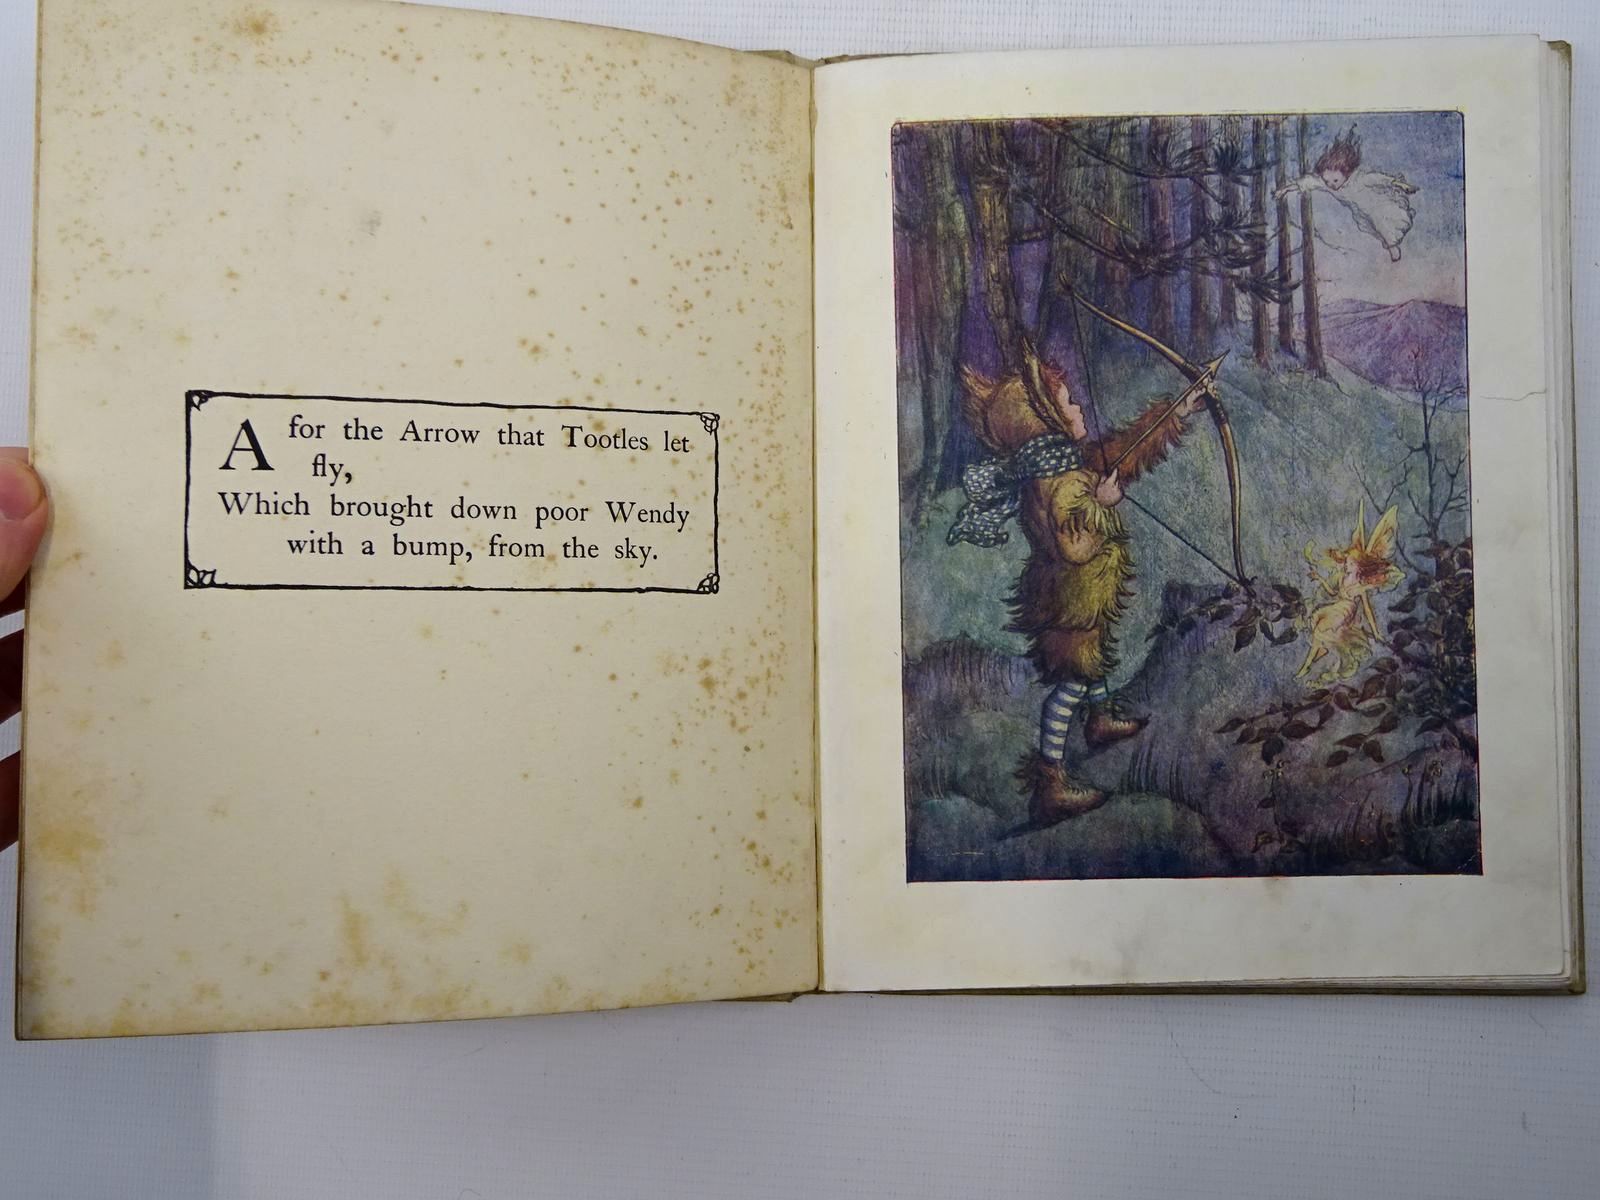 Photo of PETER PAN'S ABC written by Barrie, J.M. illustrated by White, Flora published by Oxford University Press, Humphrey Milford (STOCK CODE: 2125360)  for sale by Stella & Rose's Books